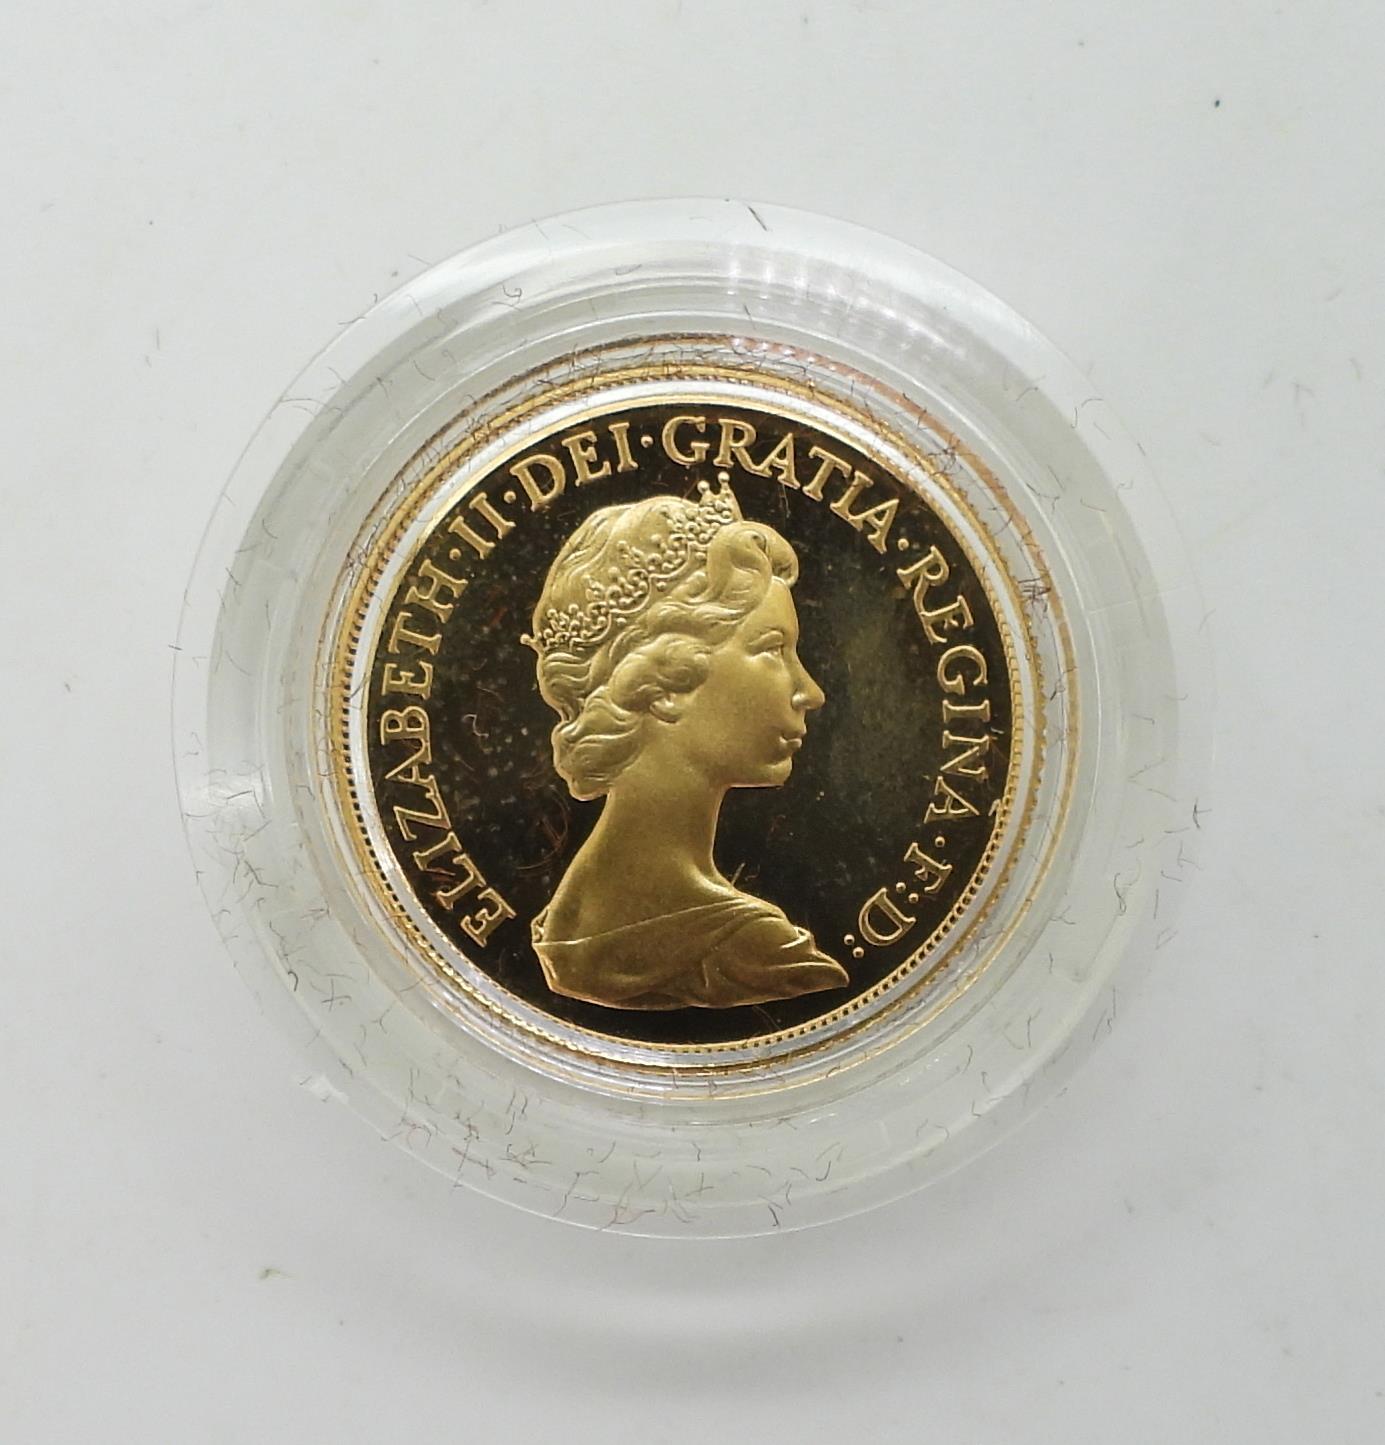 ELIZABETH II sovereign coin 1981 Obverse; second crowned portrait of HM Queen Elizabeth II right, - Image 2 of 5